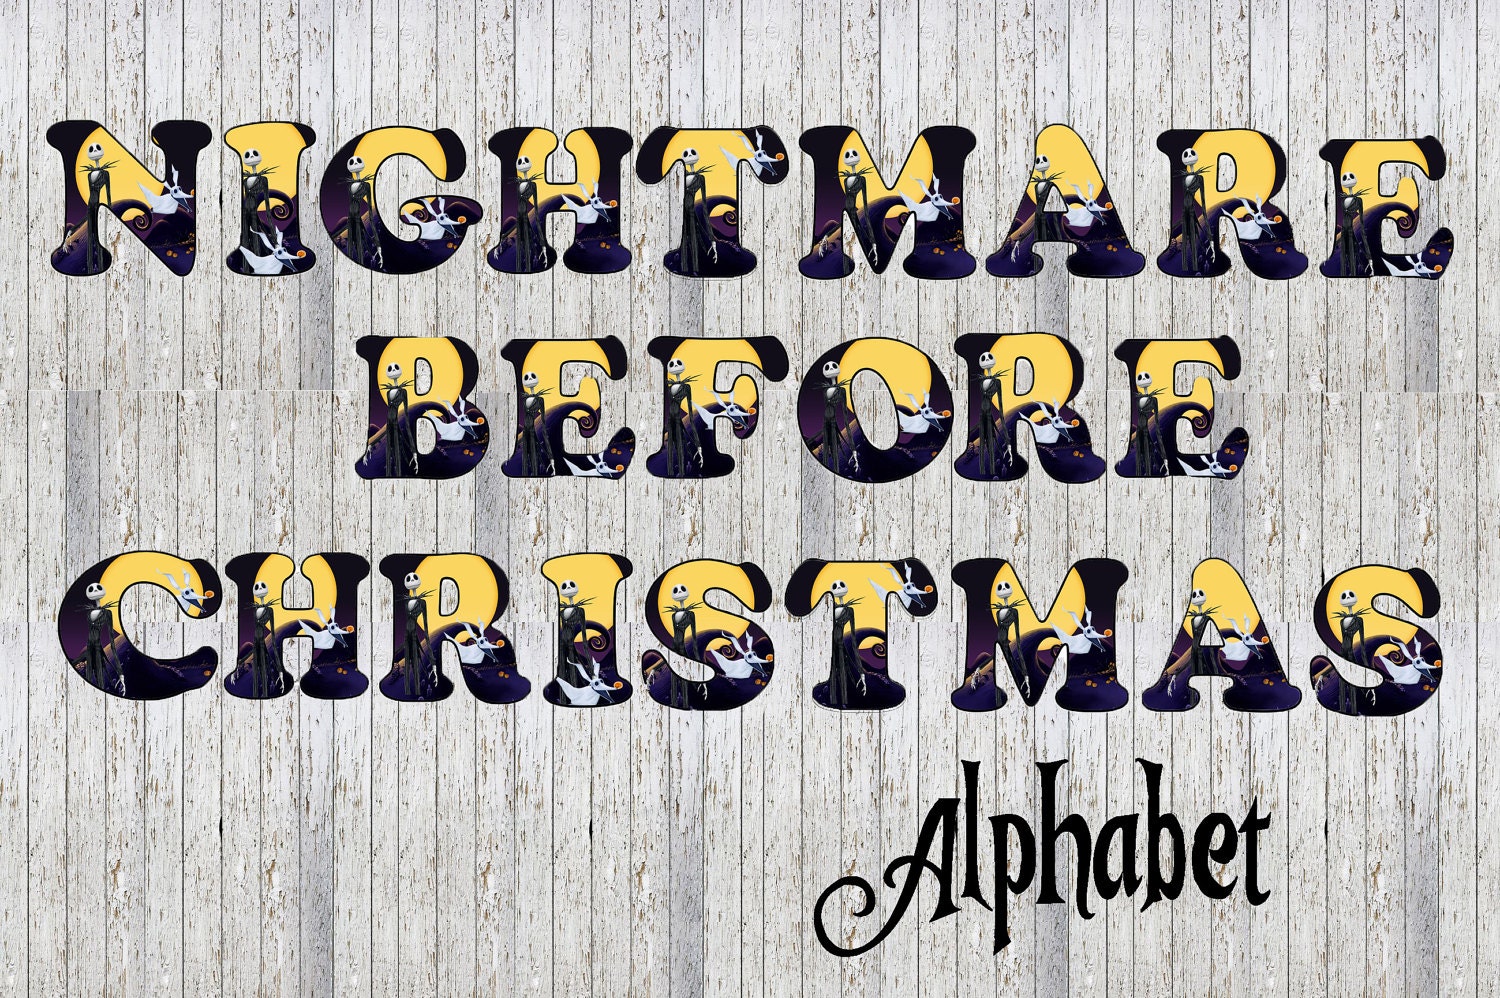 Nightmare Before Christmas 26 Alphabet Images Party Event | Etsy